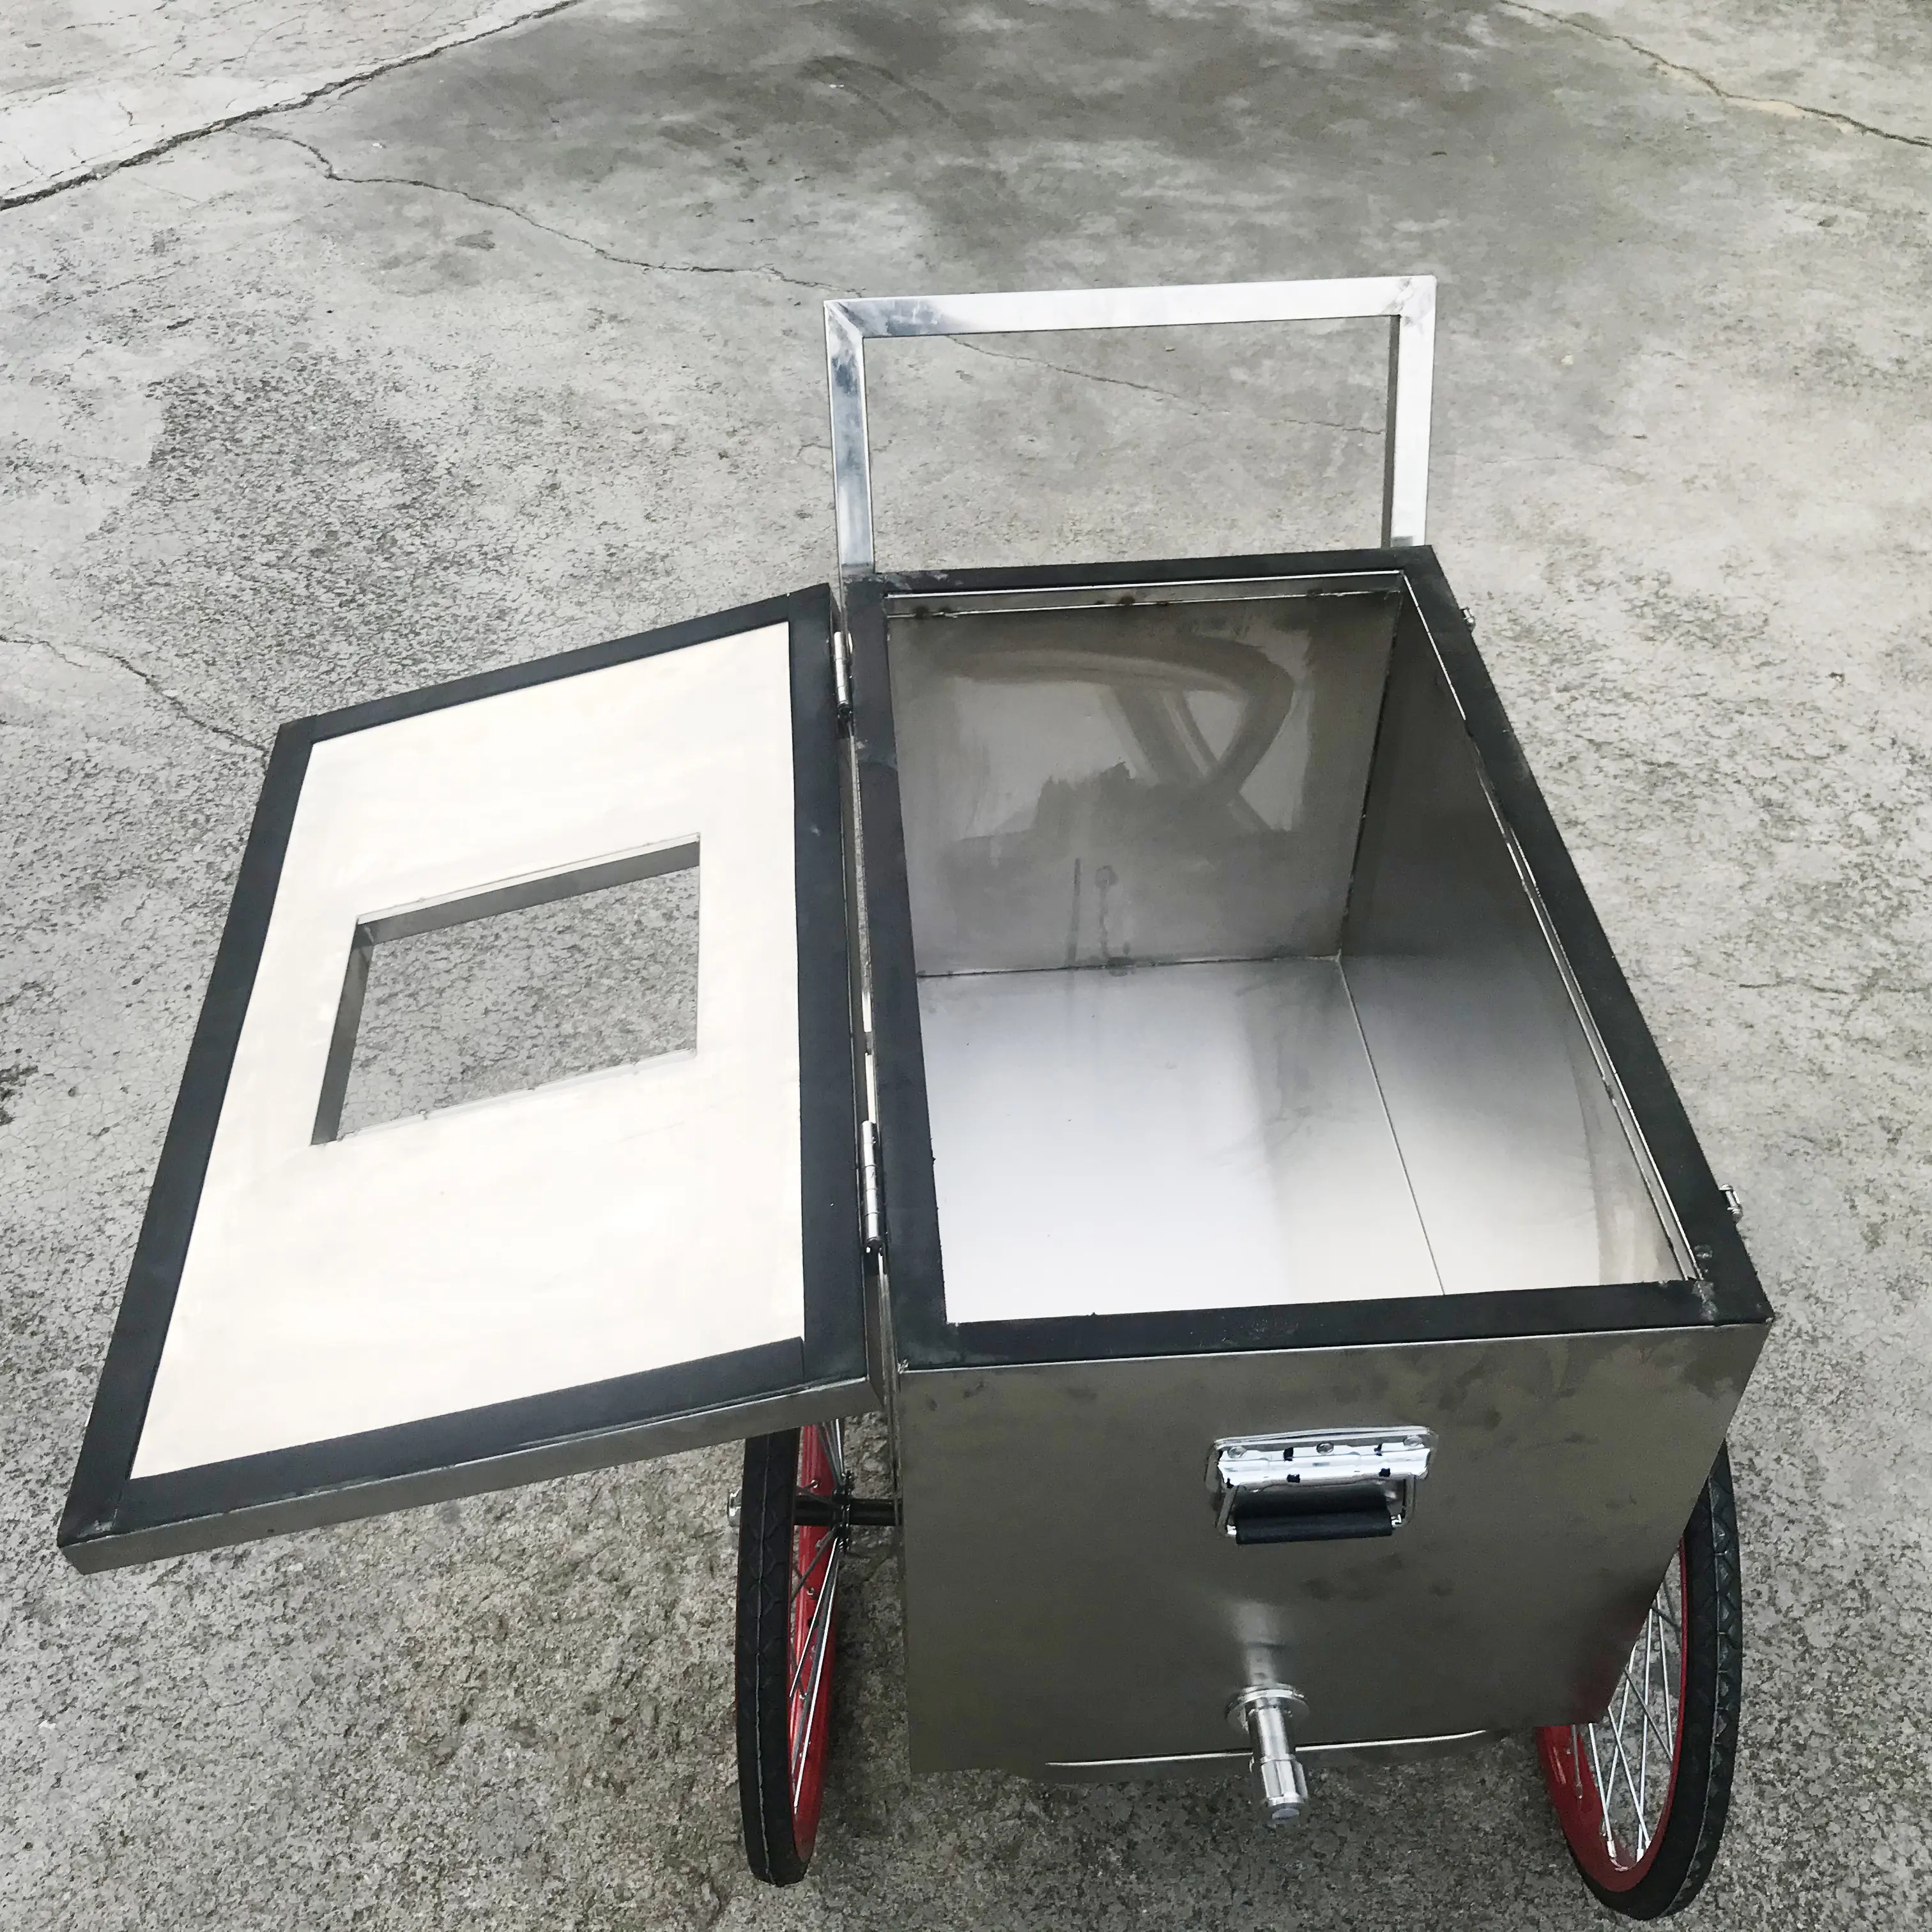 Ice cream Popsicle freezer with tricycle bike cargo